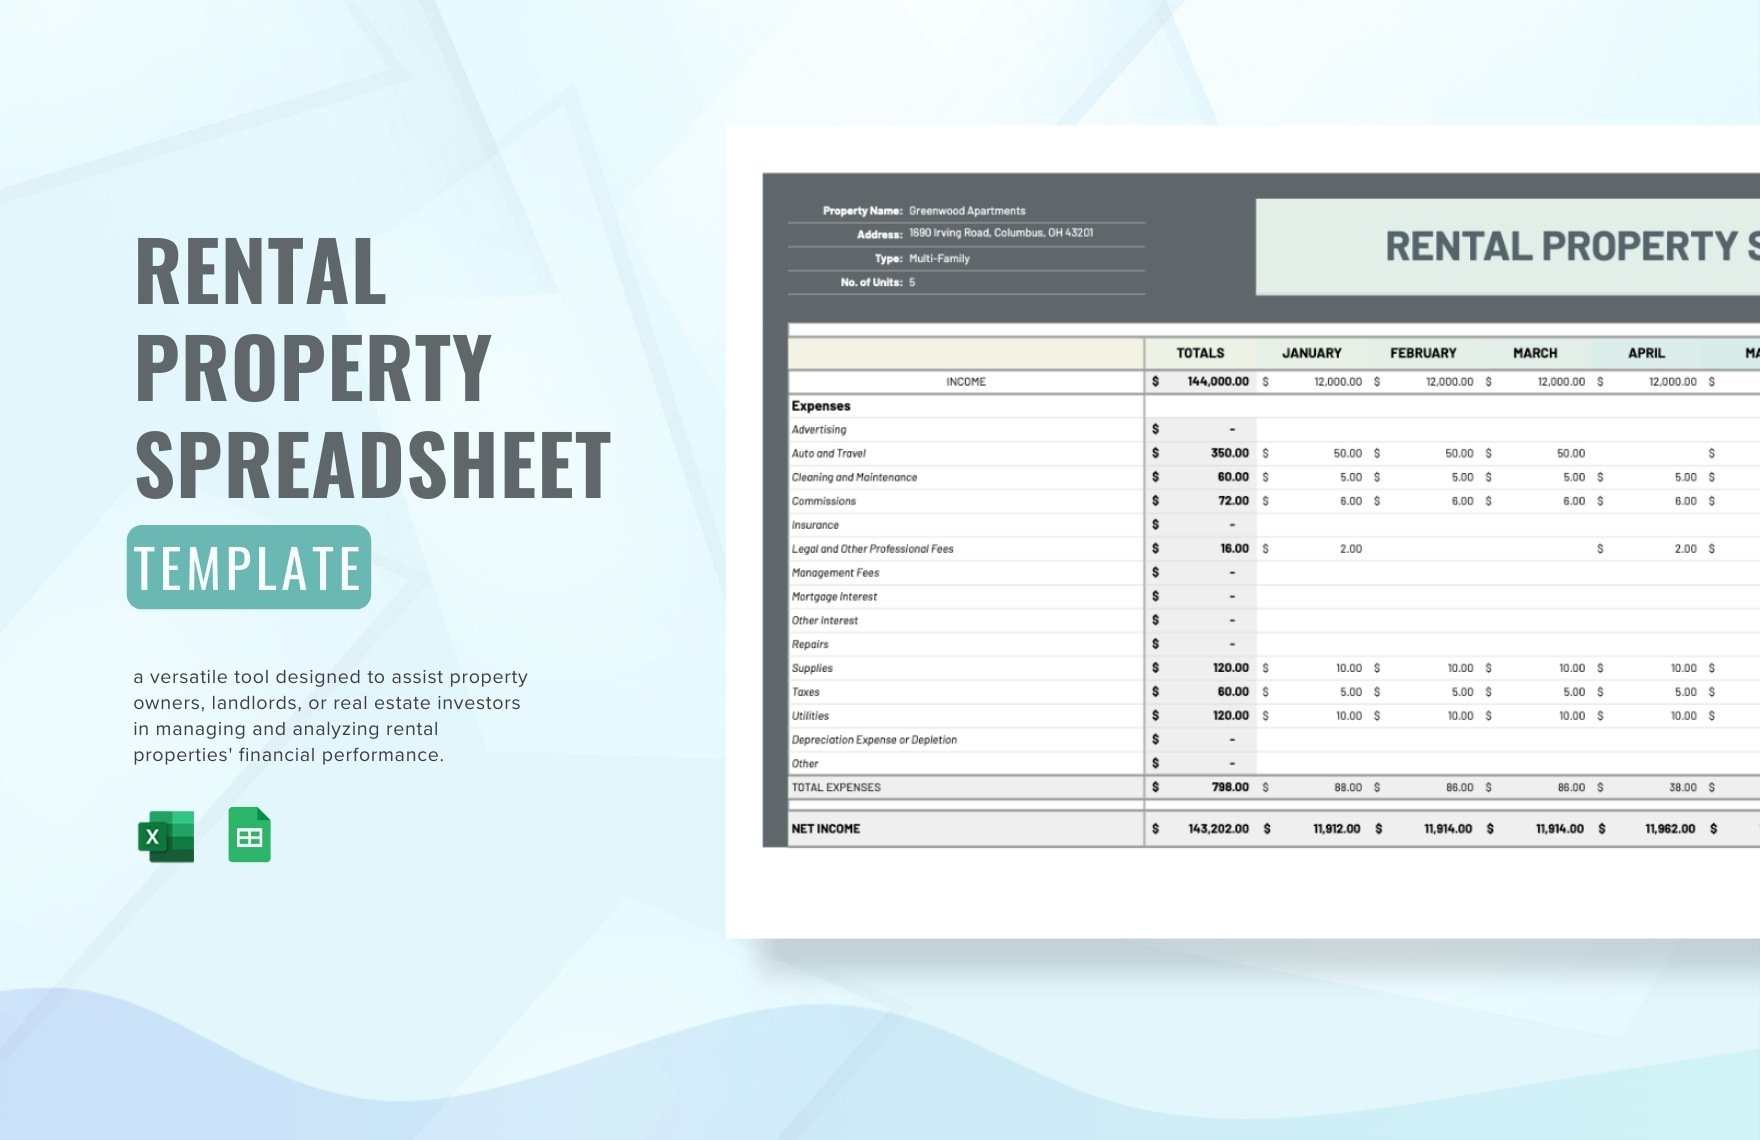 Rental Property Spreadsheet Template in Excel, Google Sheets